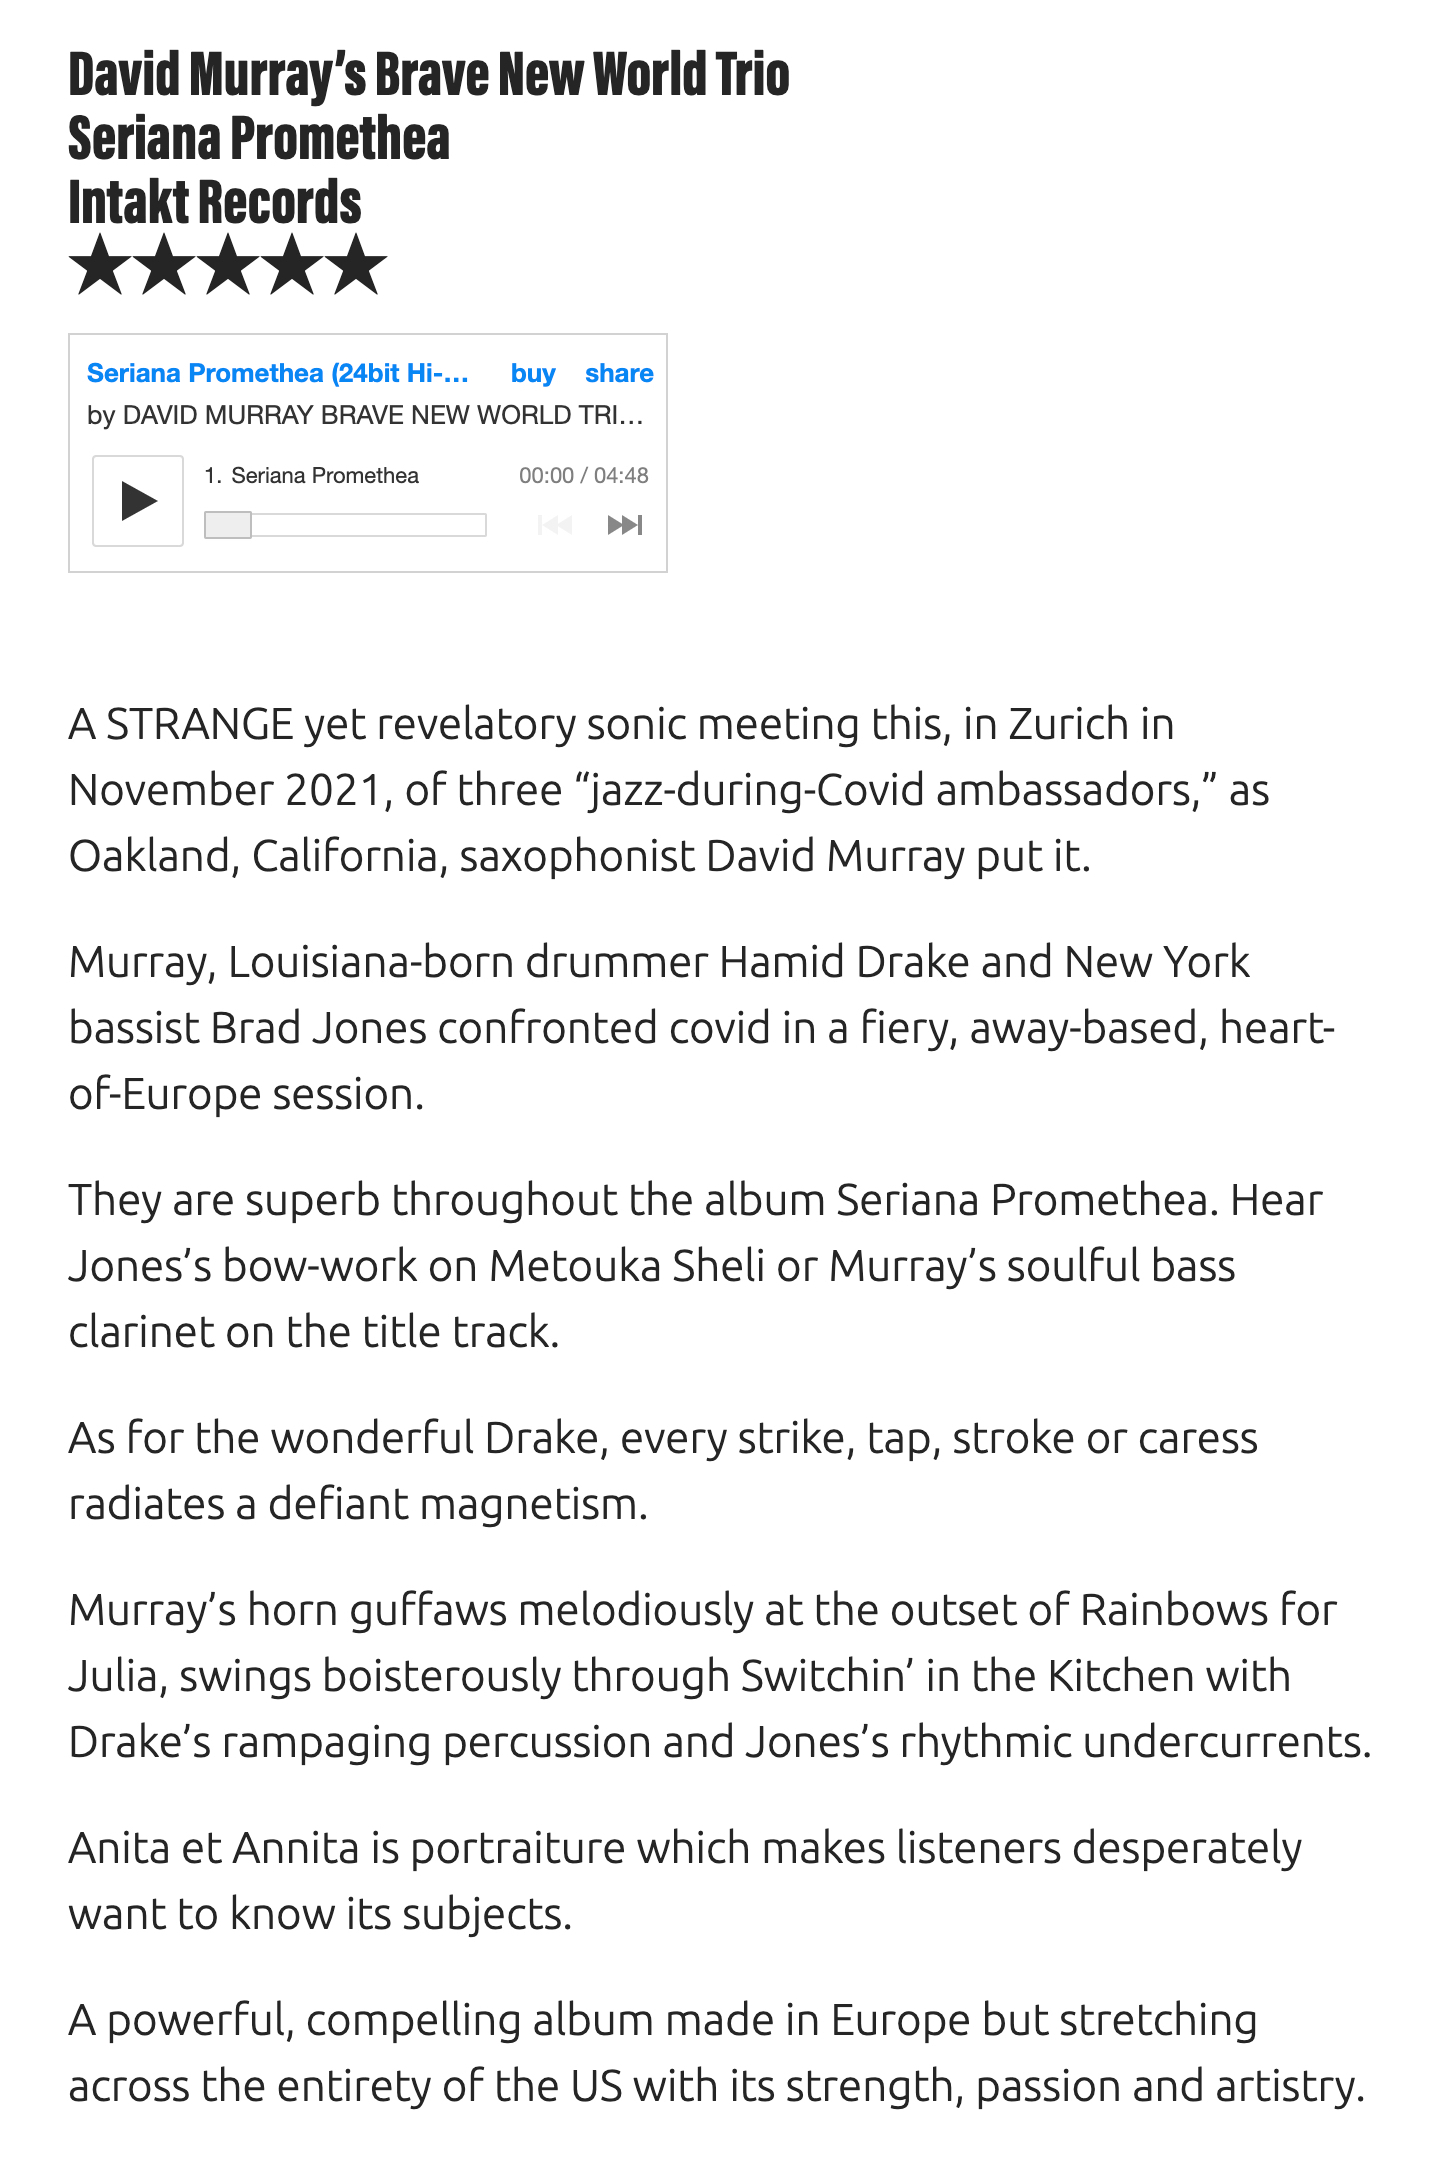 A STRANGE yet revelatory sonic meeting this, in Zurich in November 2021, of three “jazz-during-Covid ambassadors,” as Oakland, California, saxophonist David Murray put it.